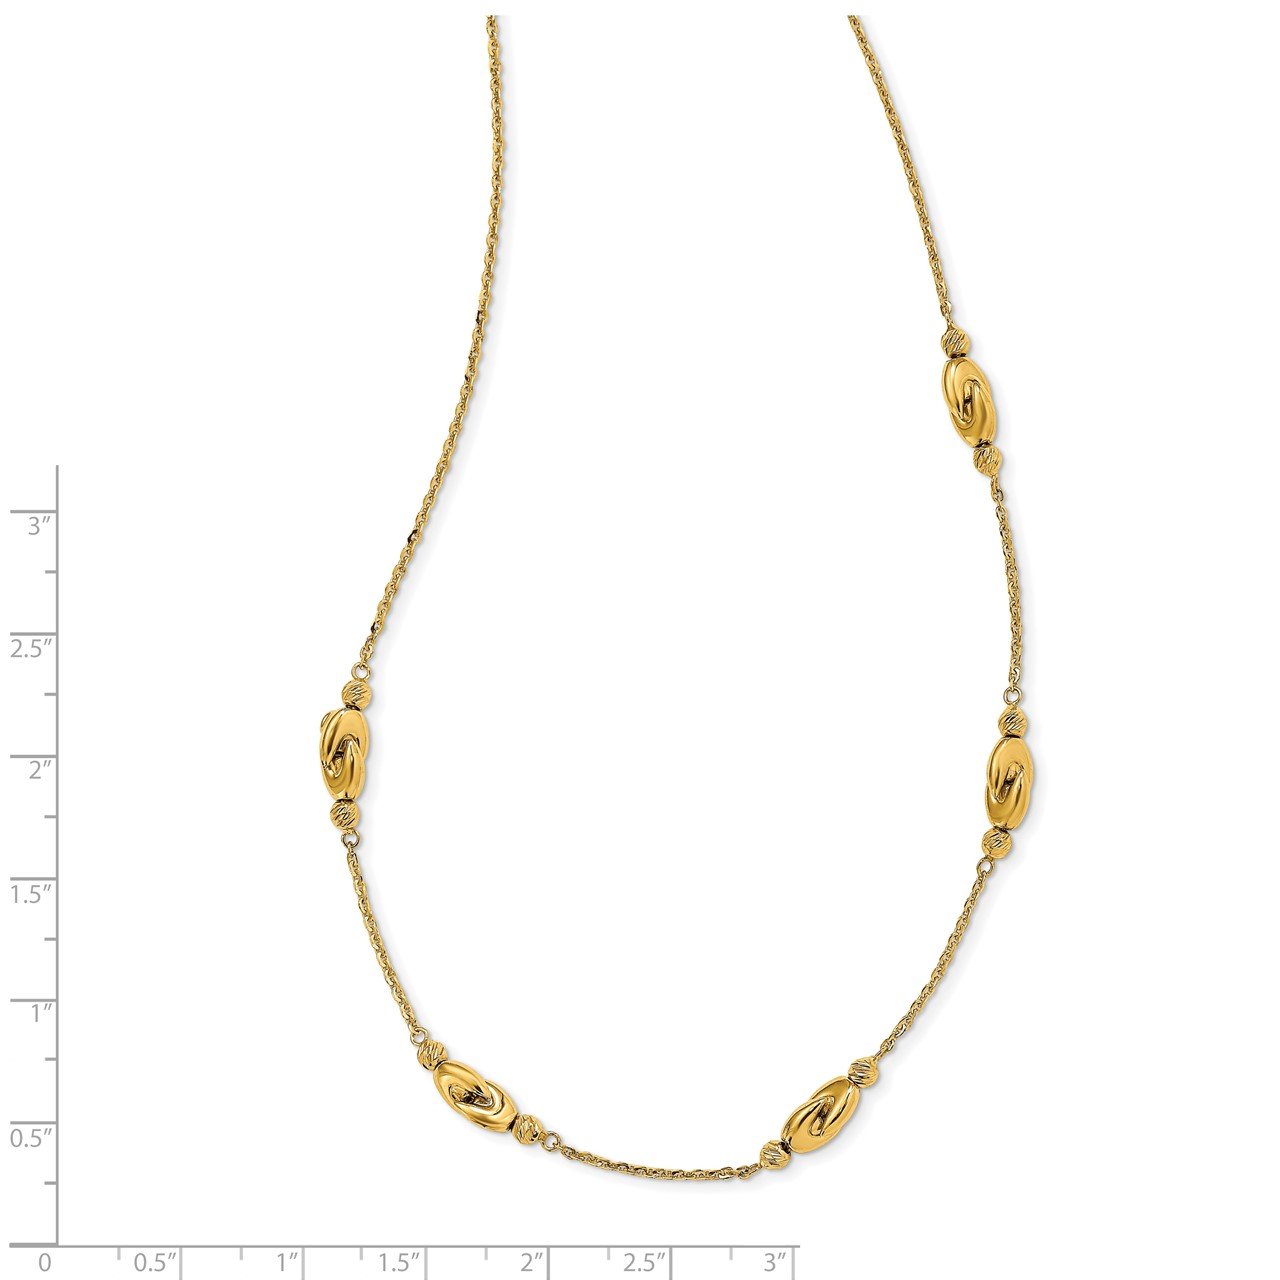 14K Polished 5 Station D/C Beads with 2 in ext. Necklace-1